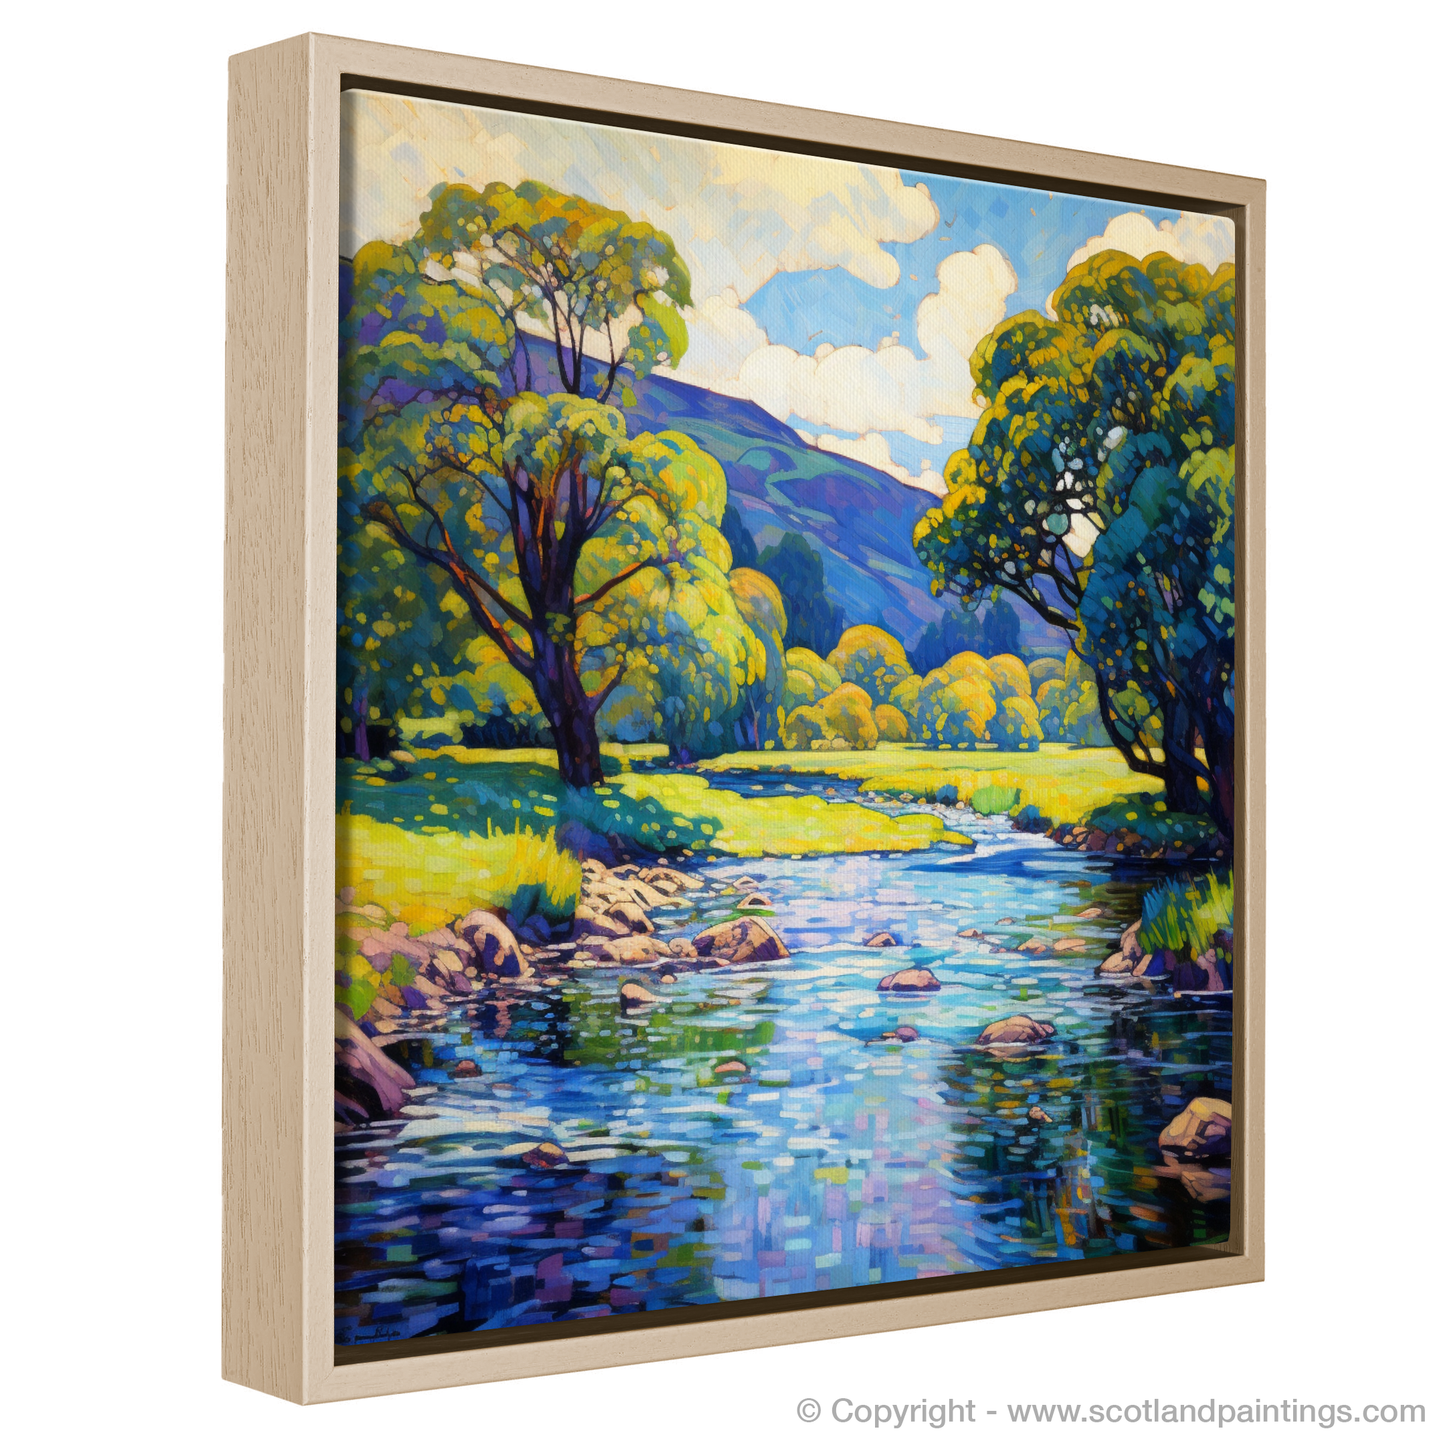 Painting and Art Print of River Earn, Perthshire in summer entitled "Summer Serenity on River Earn, Perthshire".